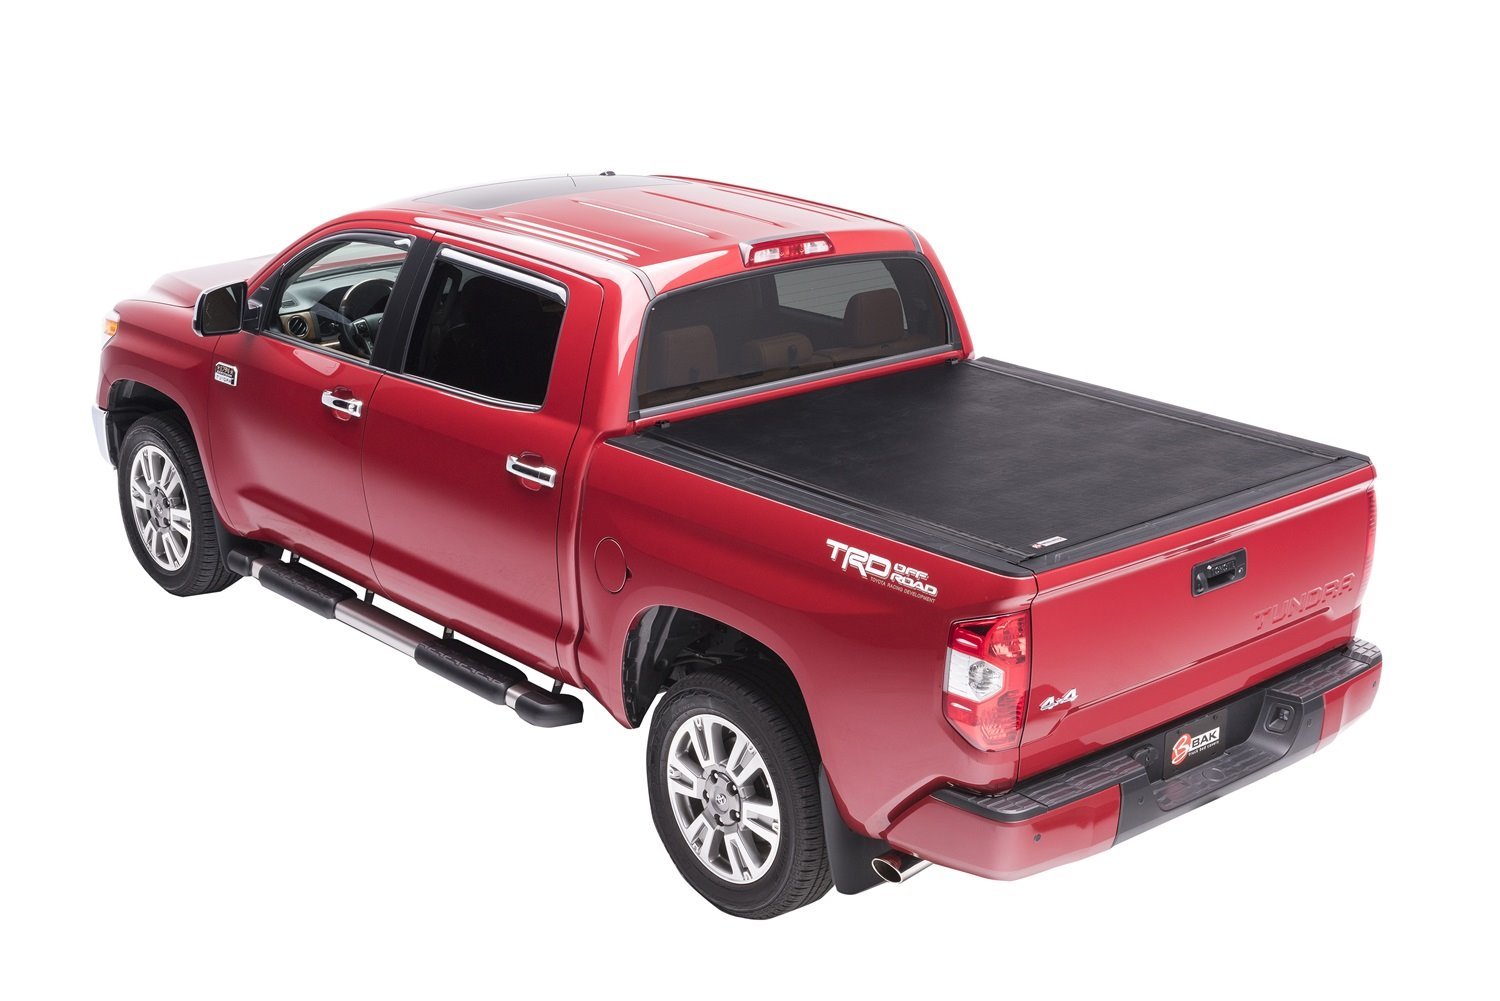 39441 Revolver X2 for Fits Select Toyota Tundra 6.6 ft. Bed, Roll-Up Hard Cover Style [Black Finish]